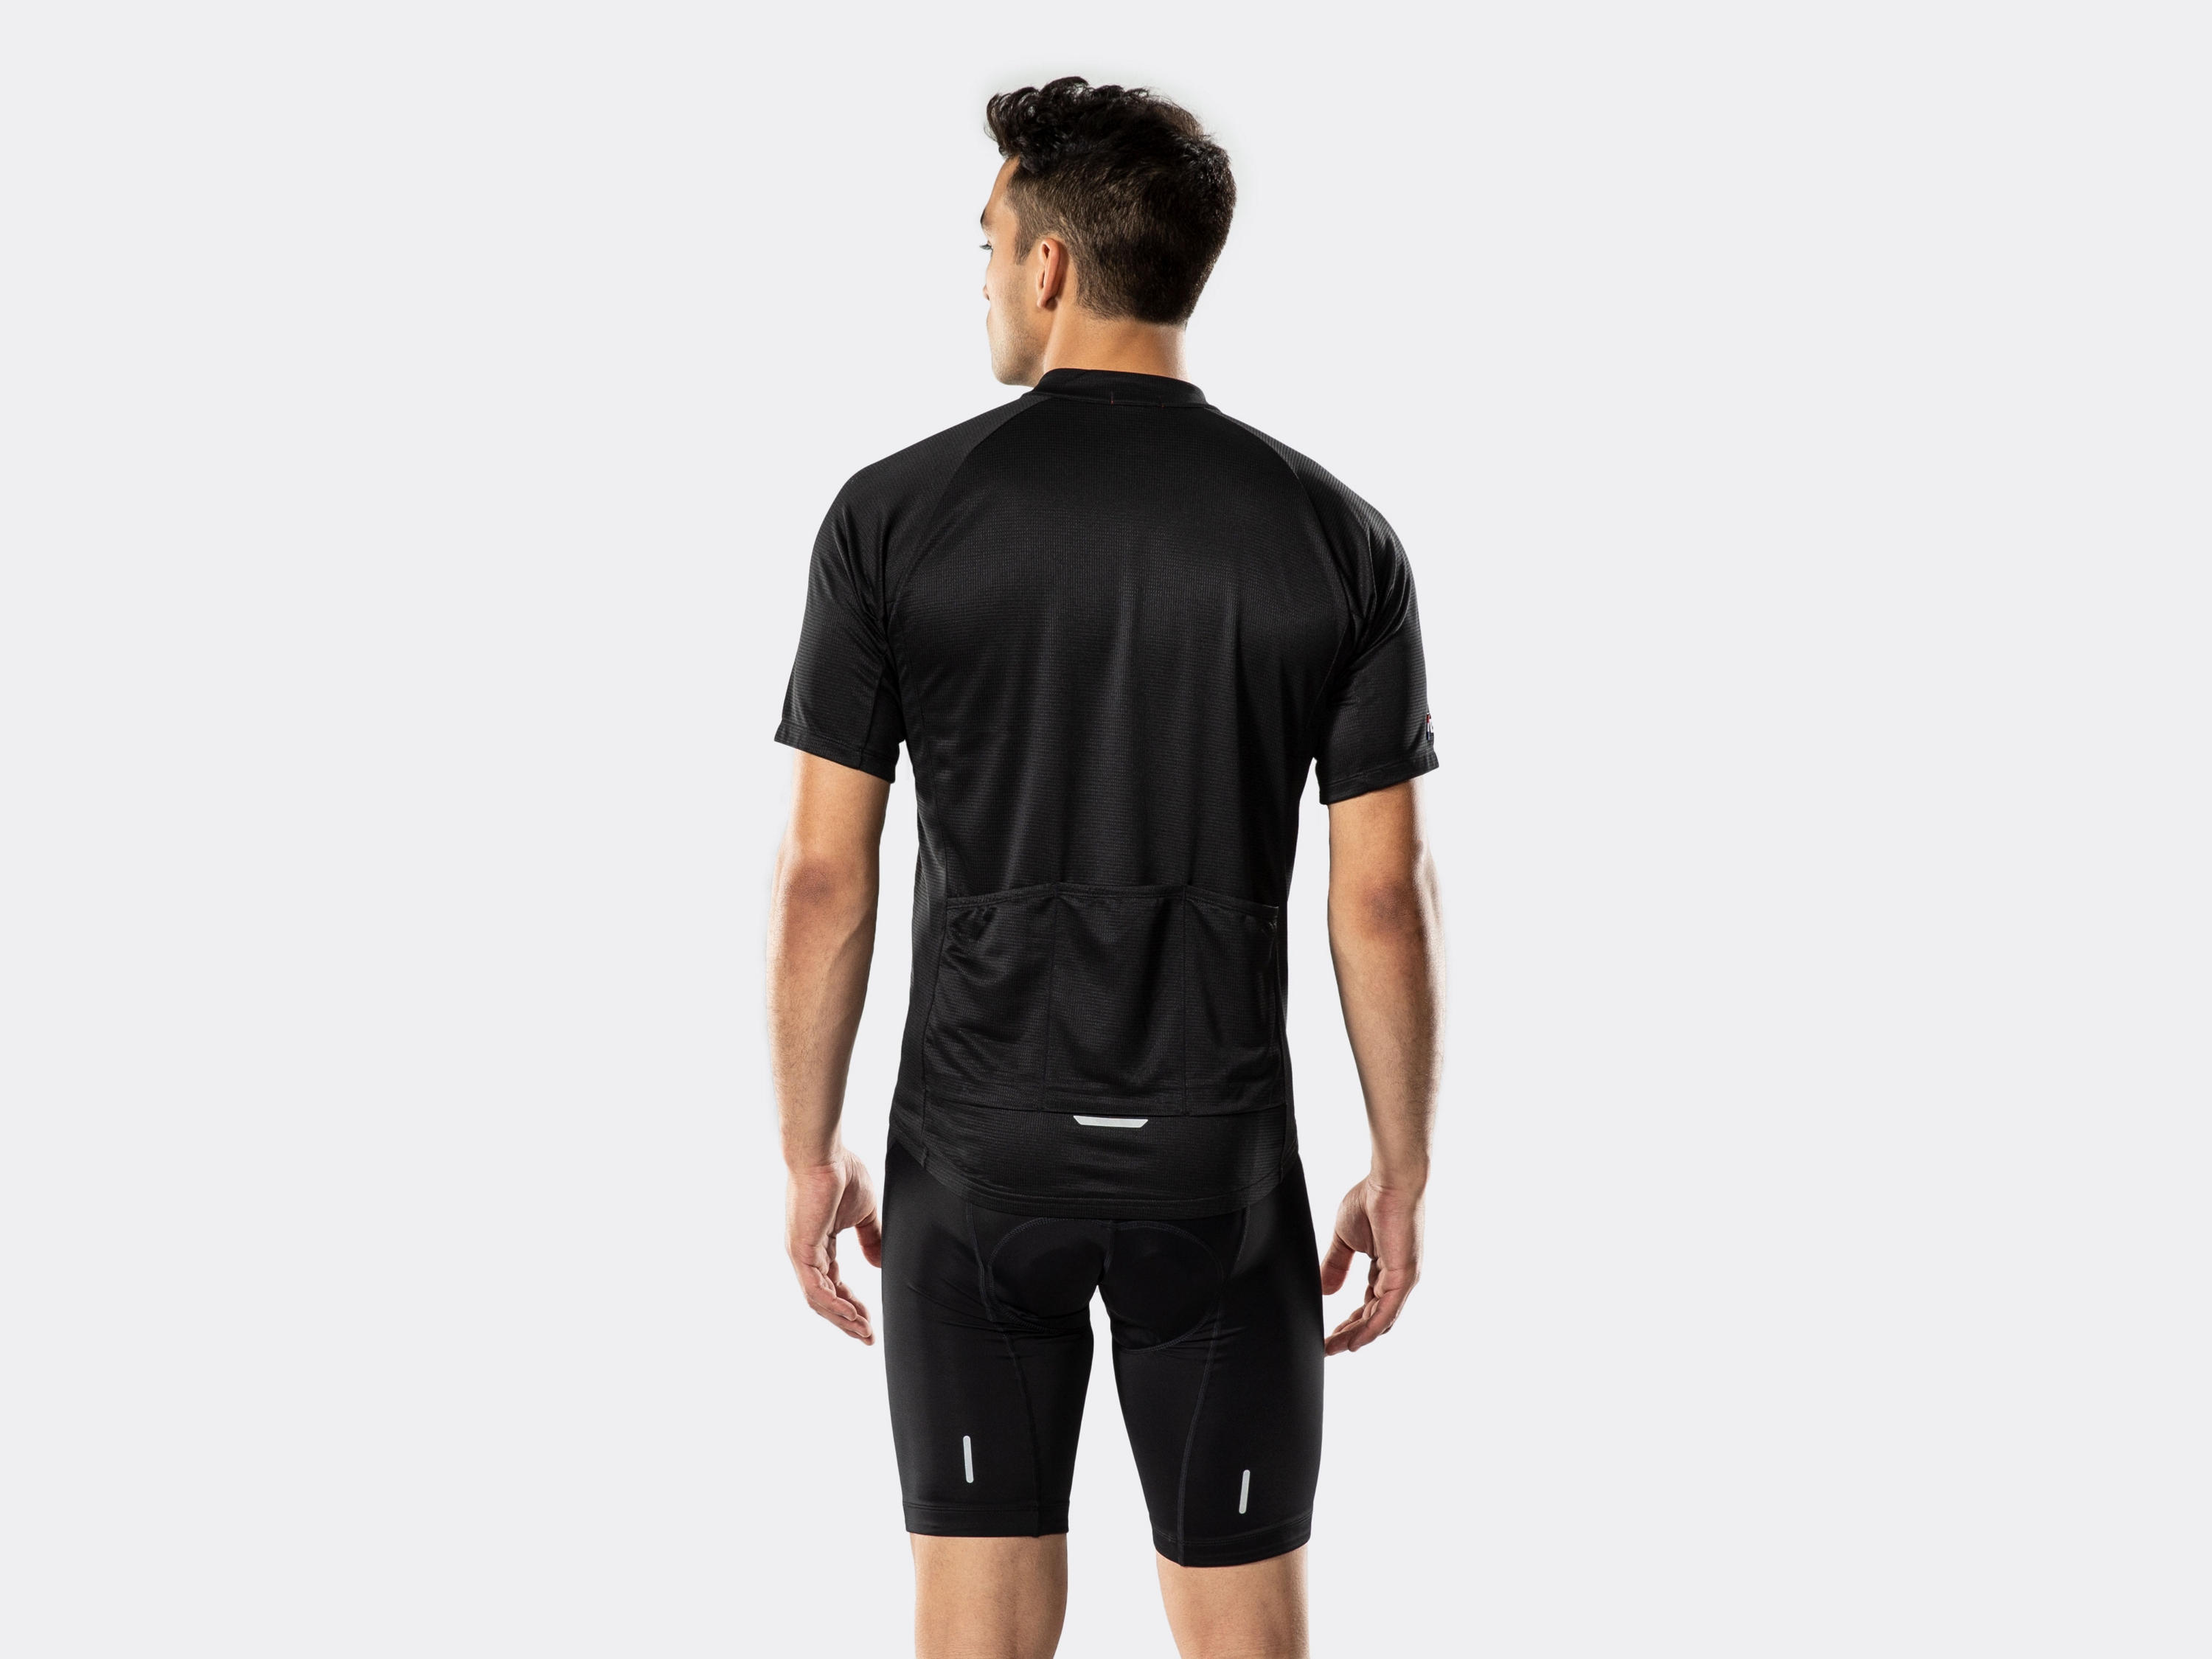 bontrager solstice cycling jersey